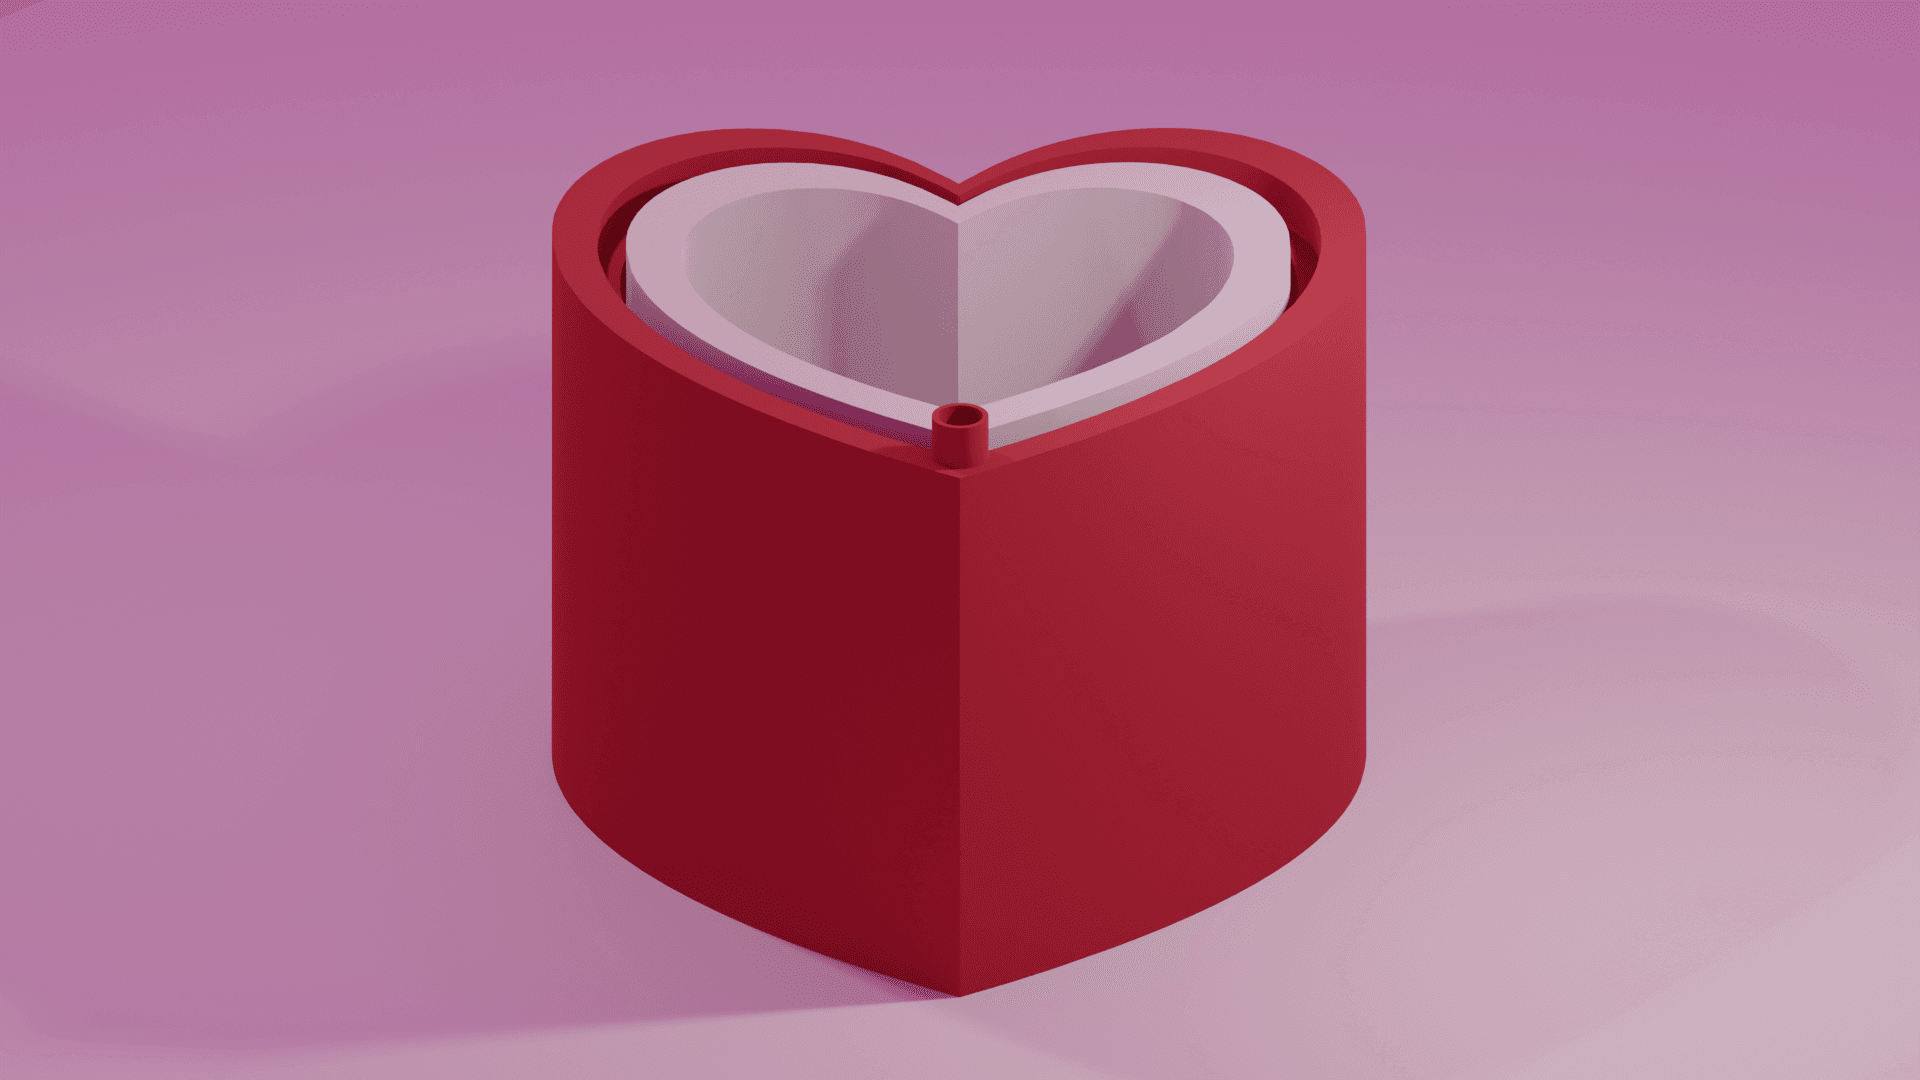 The Self Fulfilling Heart - Remix of Simple Heart Box with Lid 3d model